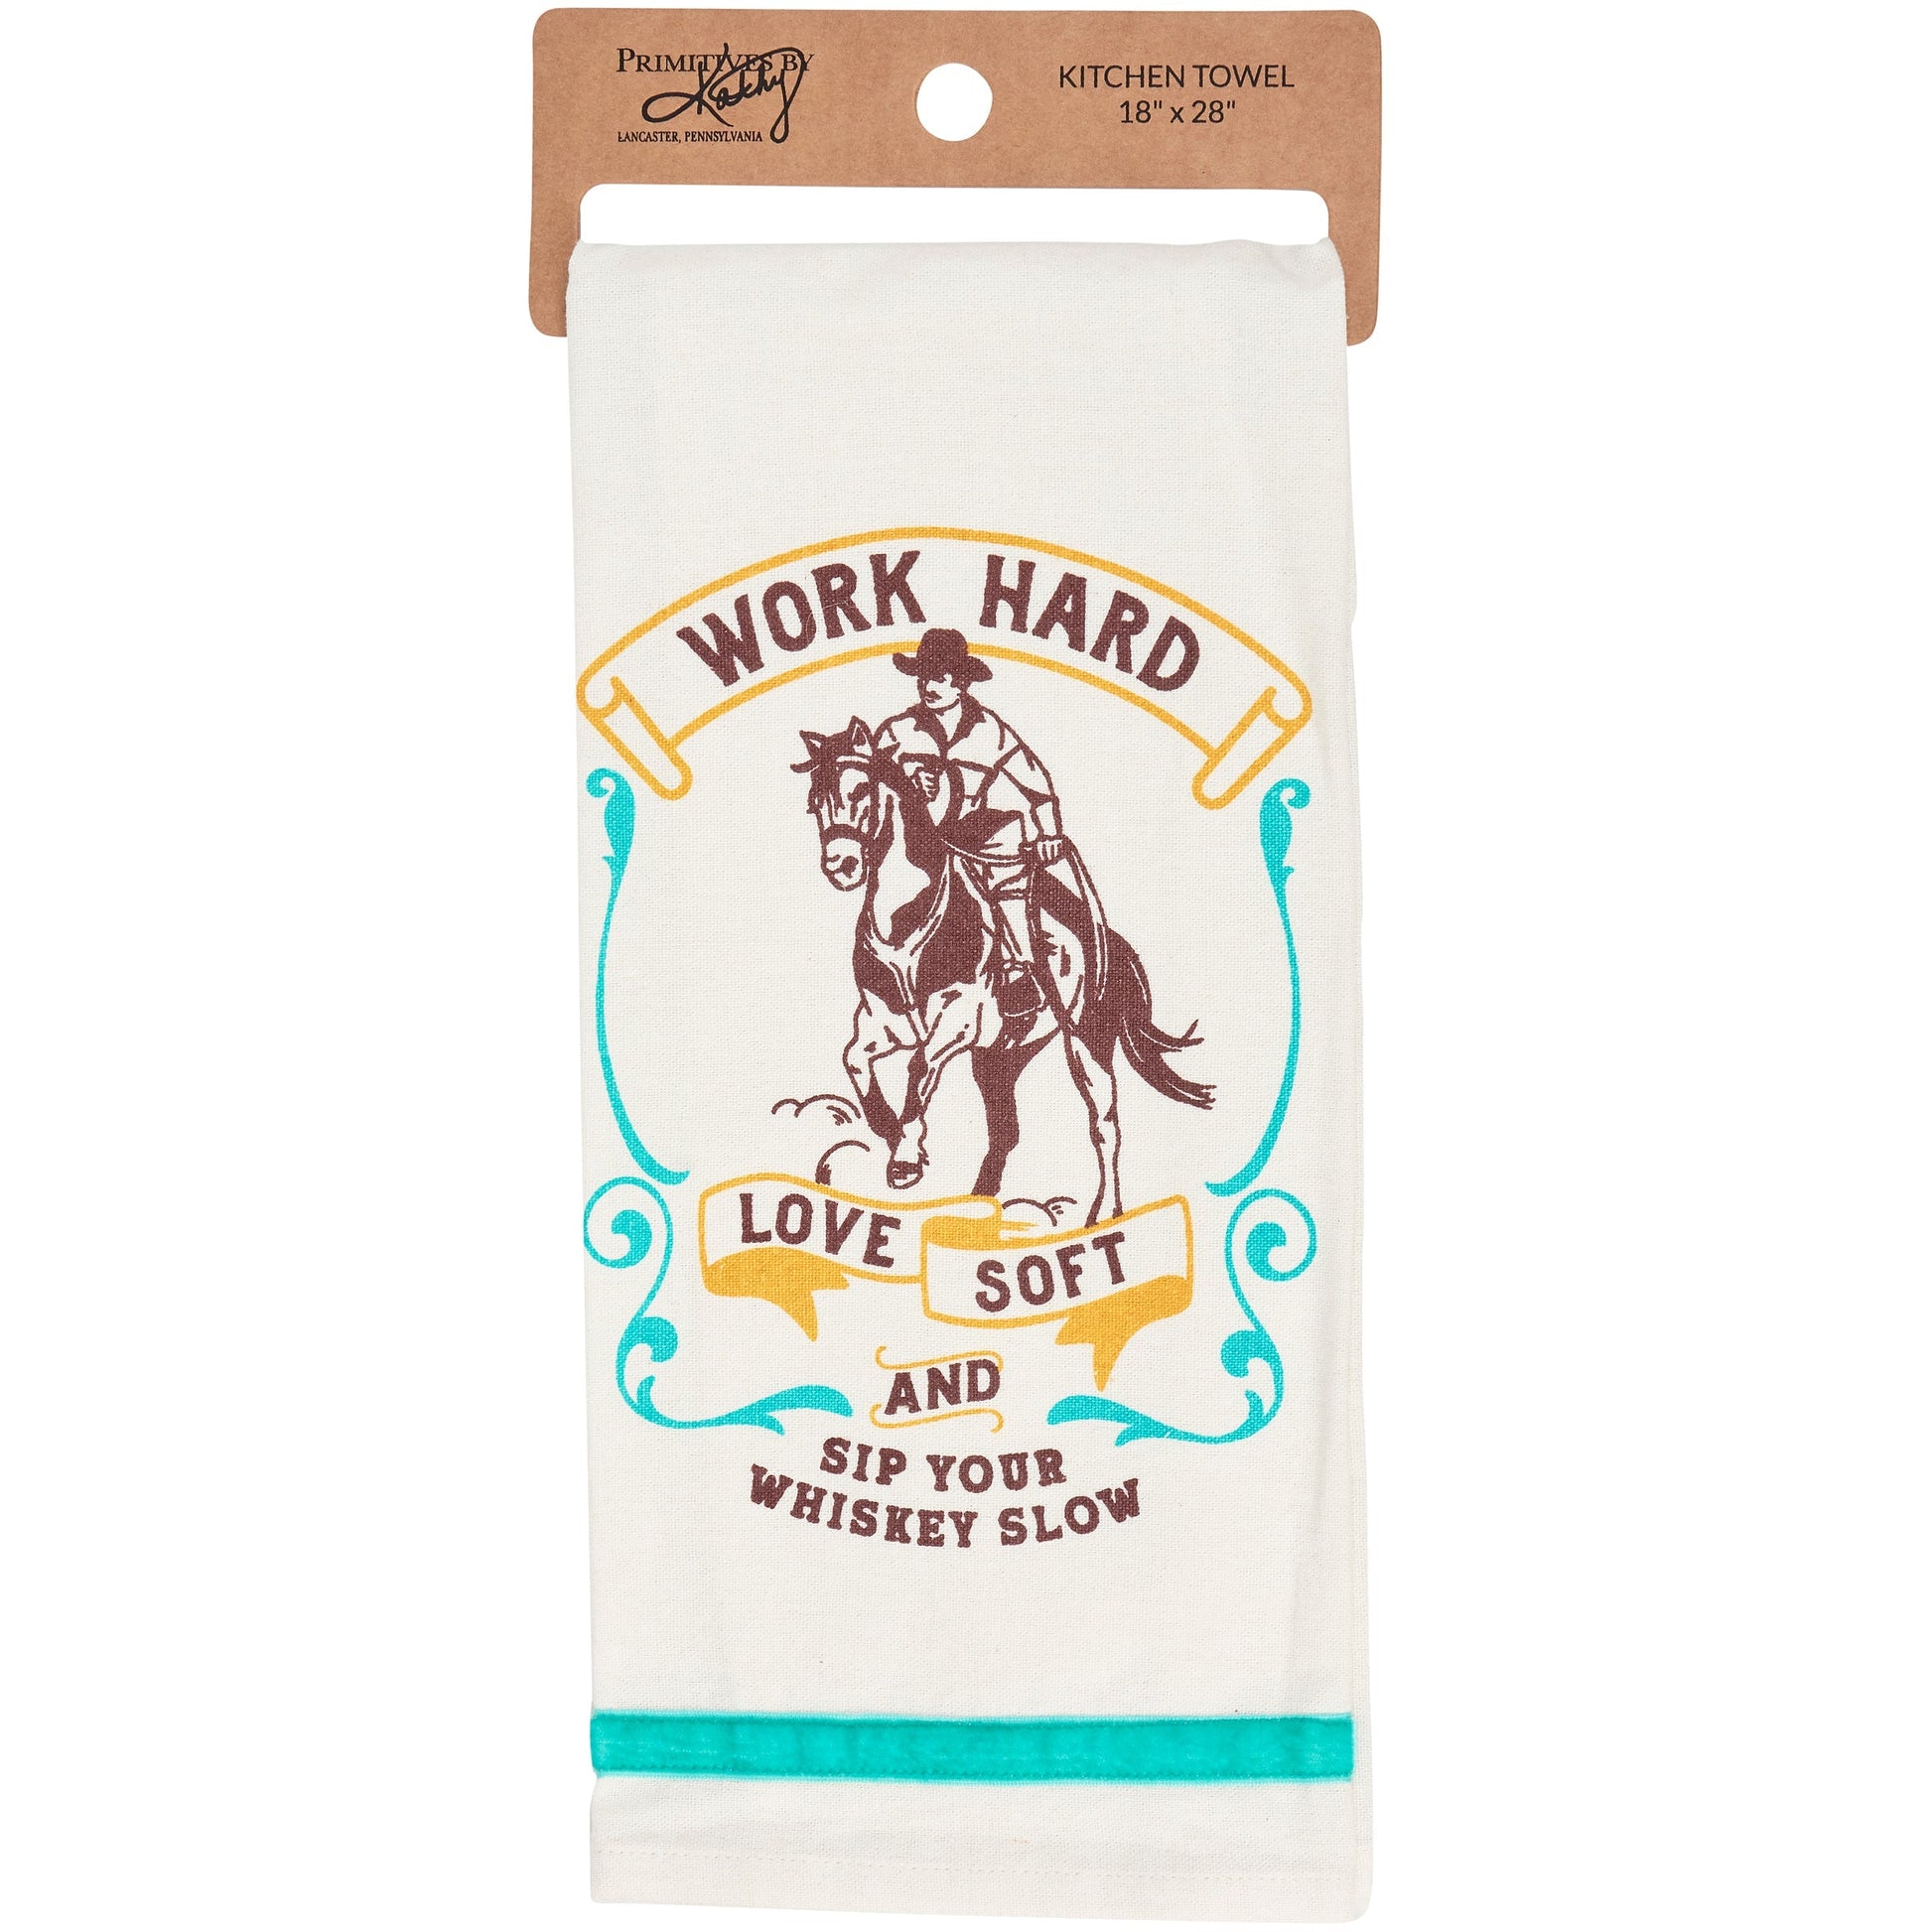 Work Hard Love Soft Sip Your Whiskey Slow Kitchen Towel | Cowboy Western-Themed Tea Hand Dish Cloth